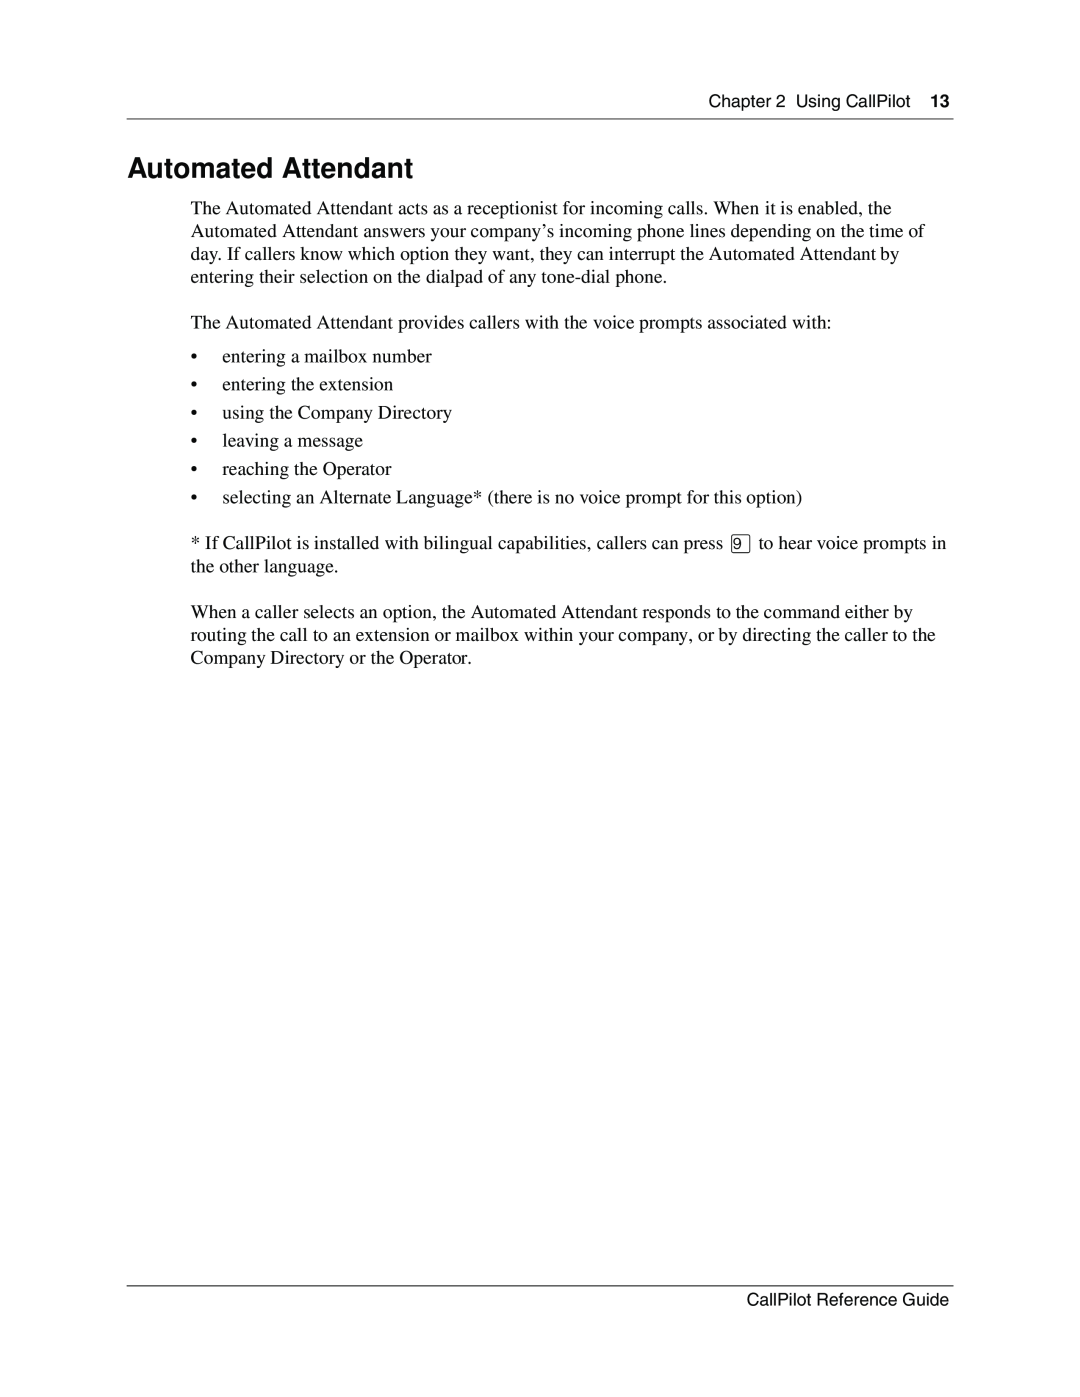 Nortel Networks CallPilot manual Automated Attendant 